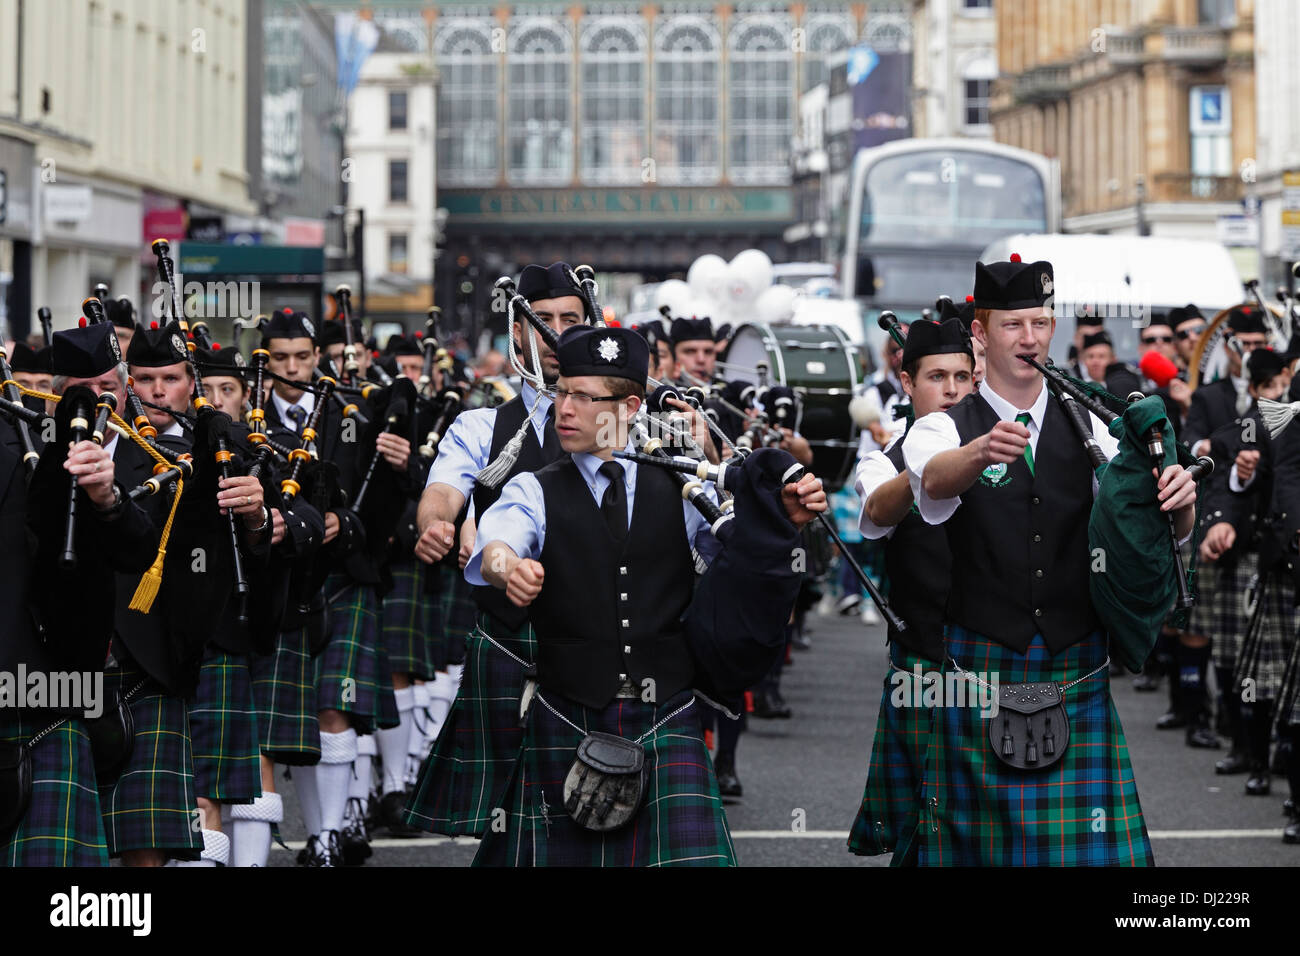 Four Pipe Bands marching on Argyle Street in Glasgow city centre, Scotland, UK Stock Photo